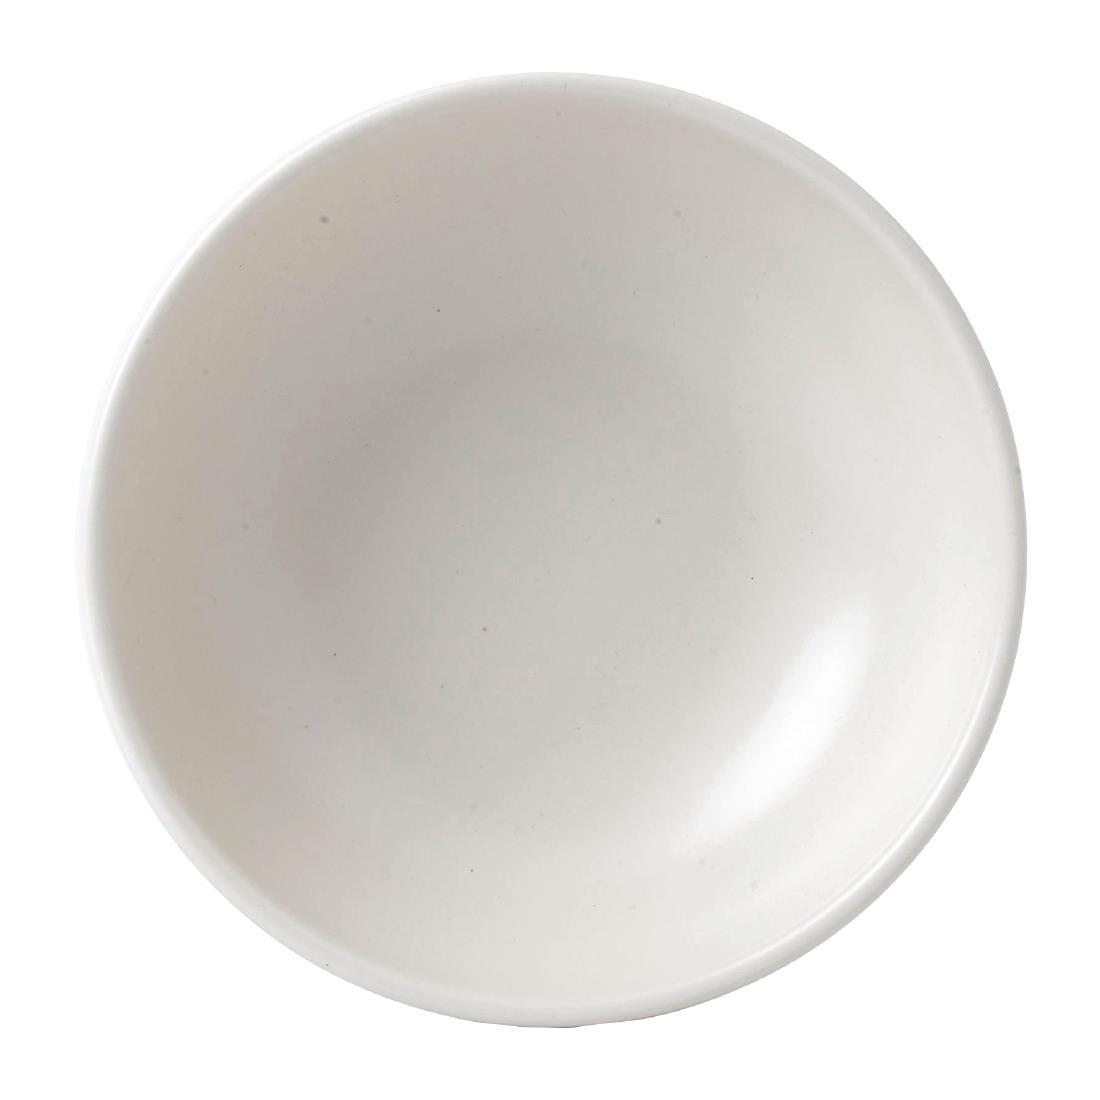 Dudson Evo Pearl Rice Bowl 178mm (Pack of 6) - FE342  - 1